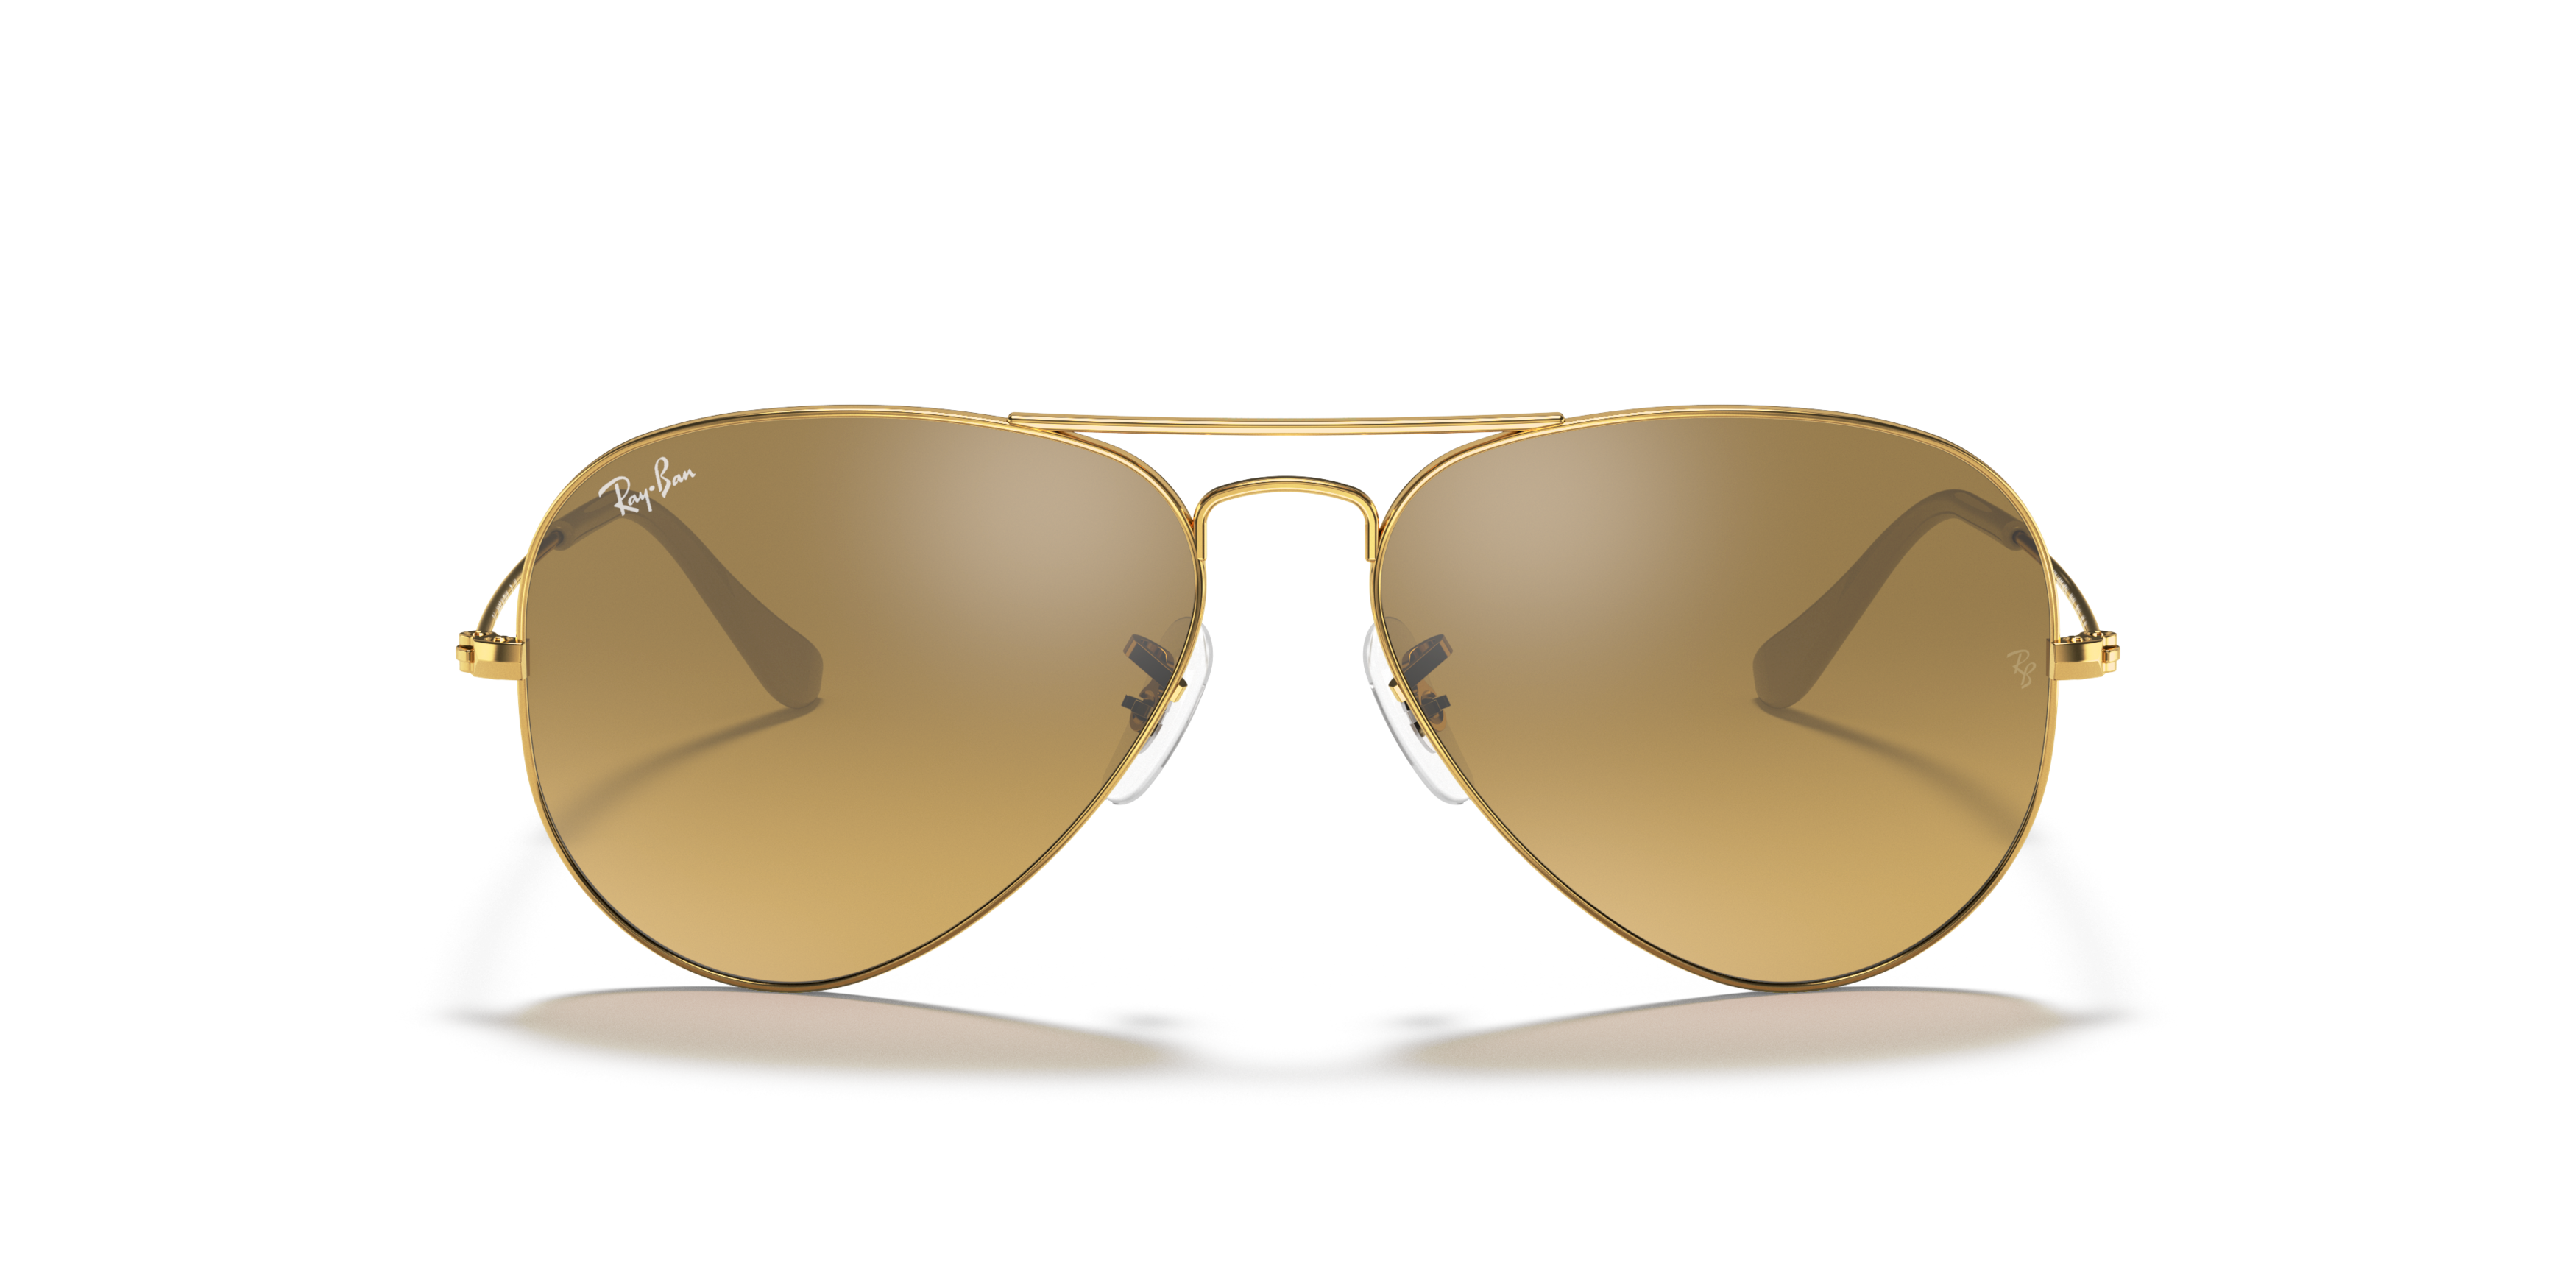 [products.image.front] Ray-Ban Aviator Large Metal RB3025 001/3K